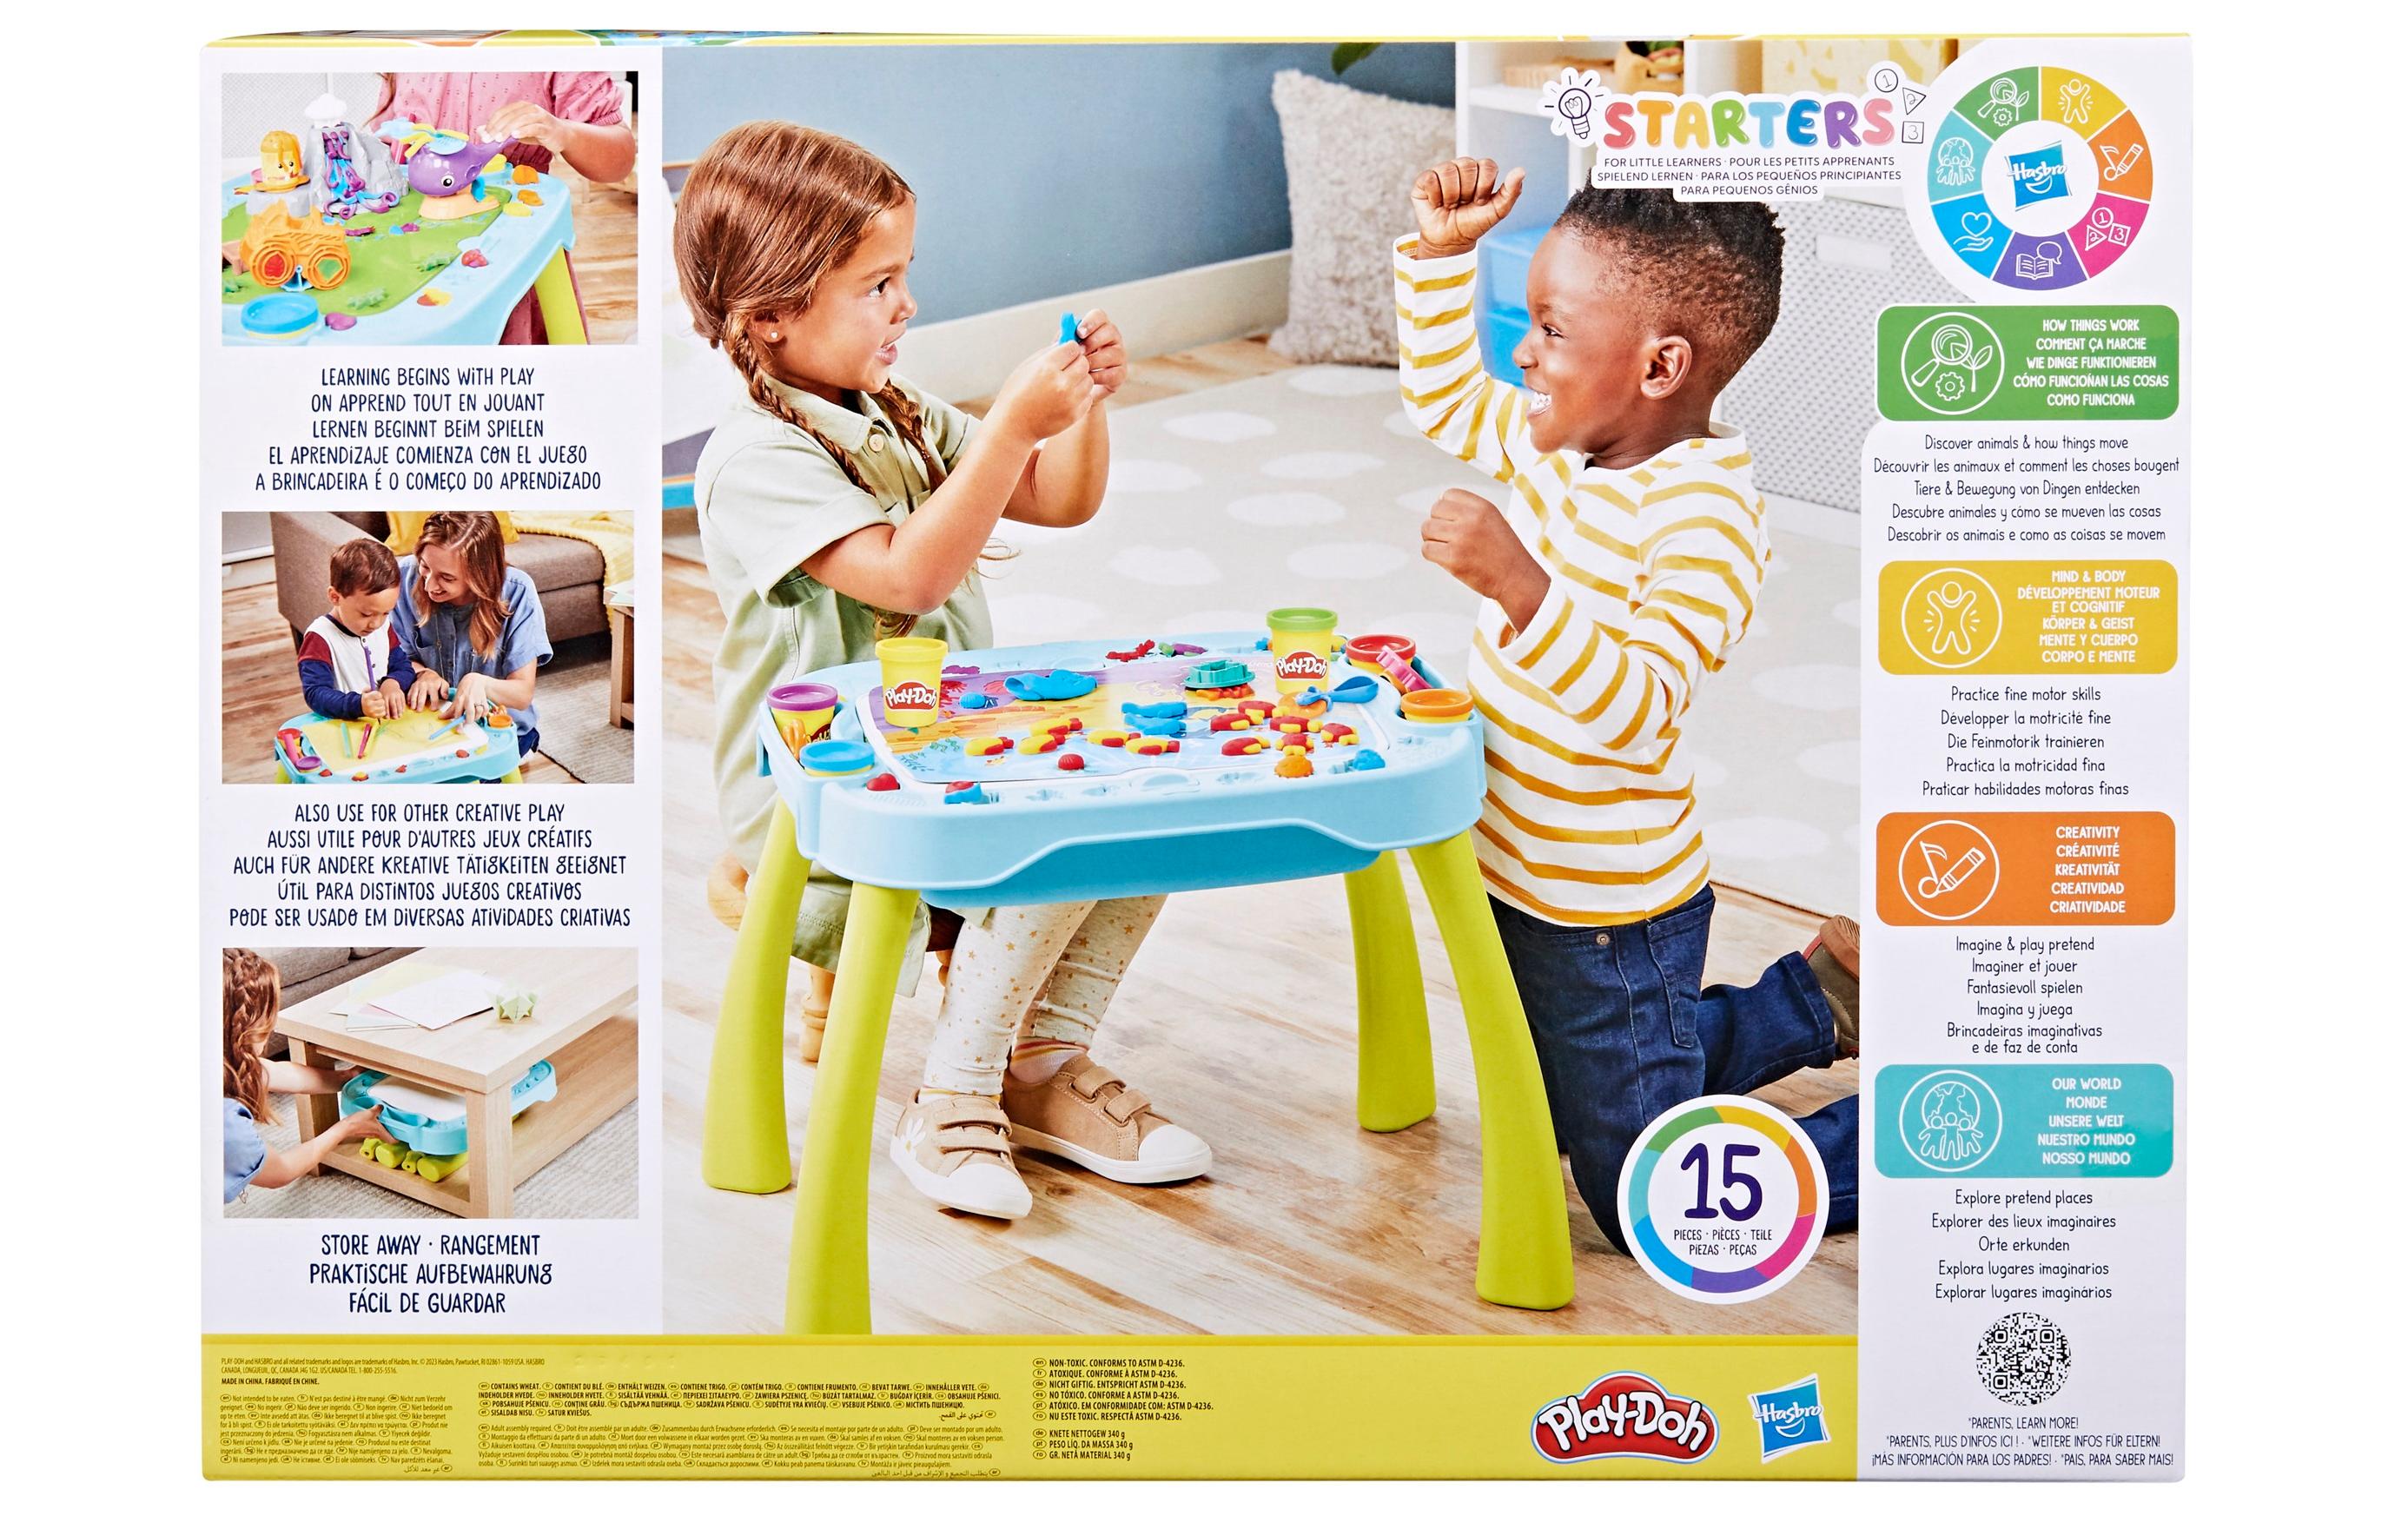 Play-Doh Knetspielzeug All-In-One Creativity Starter